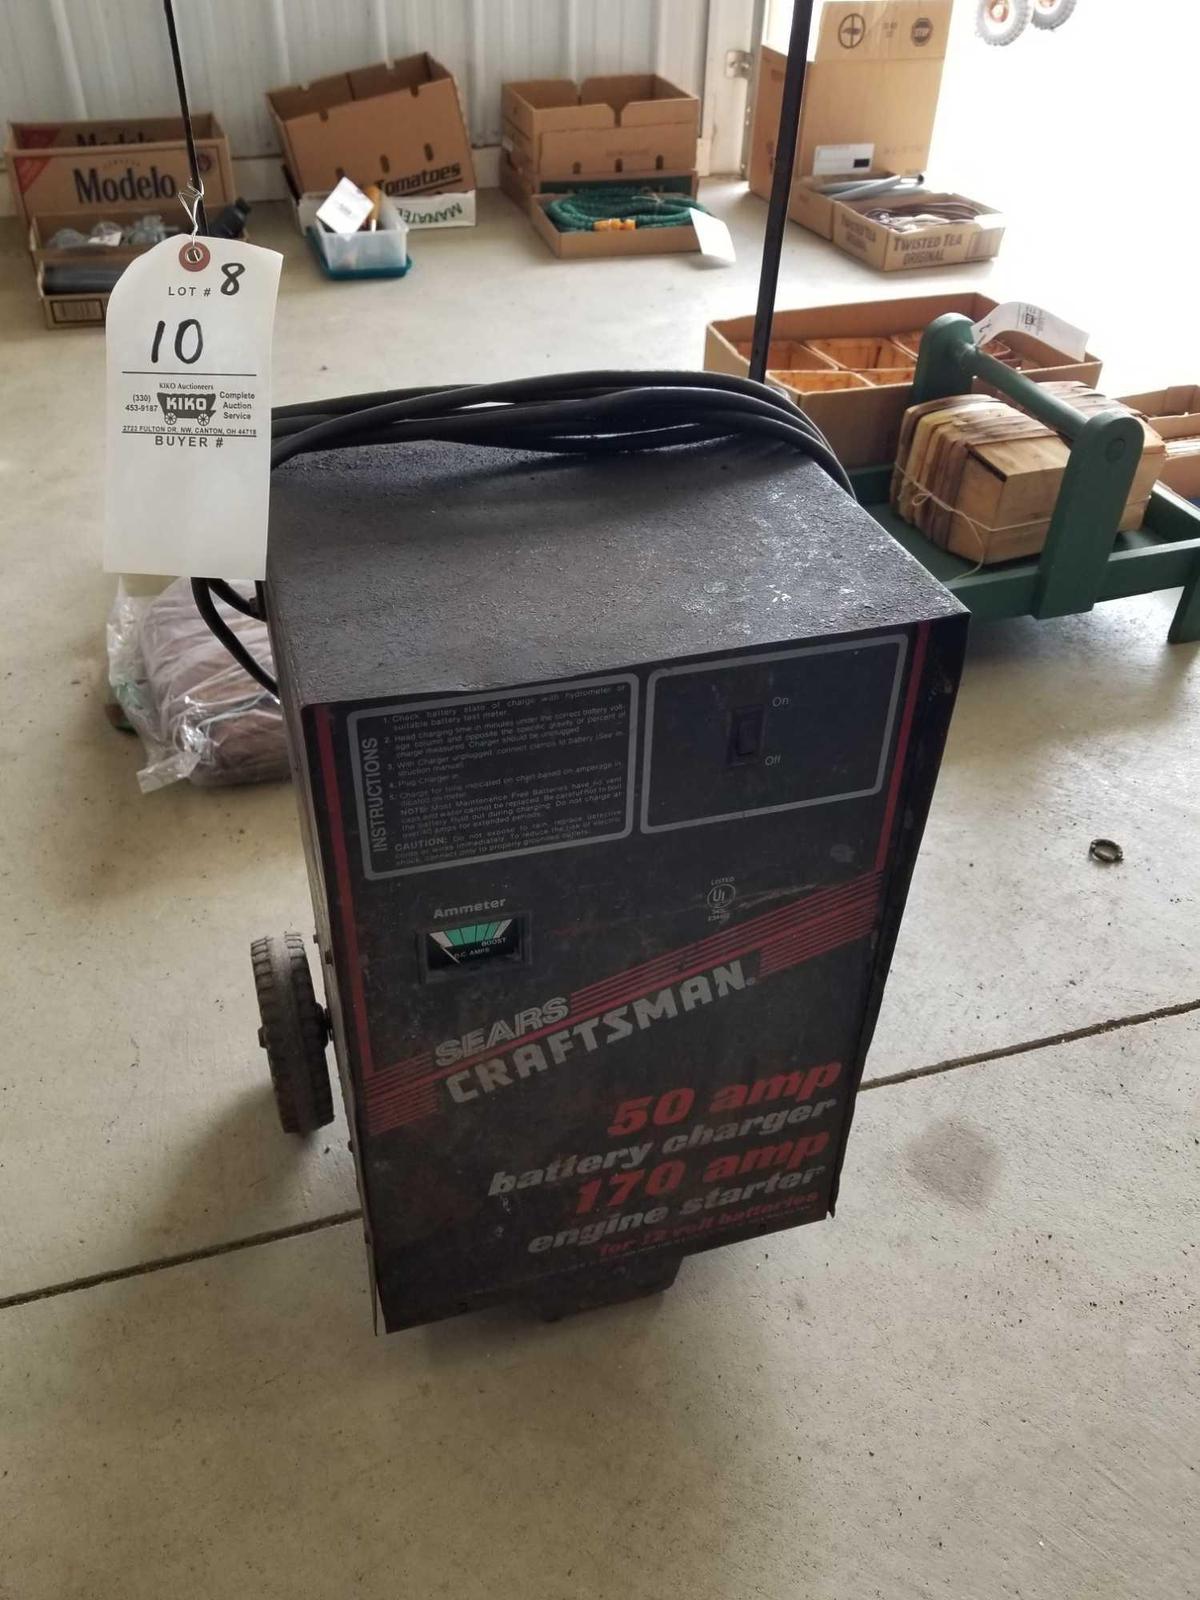 Craftsman battery charger